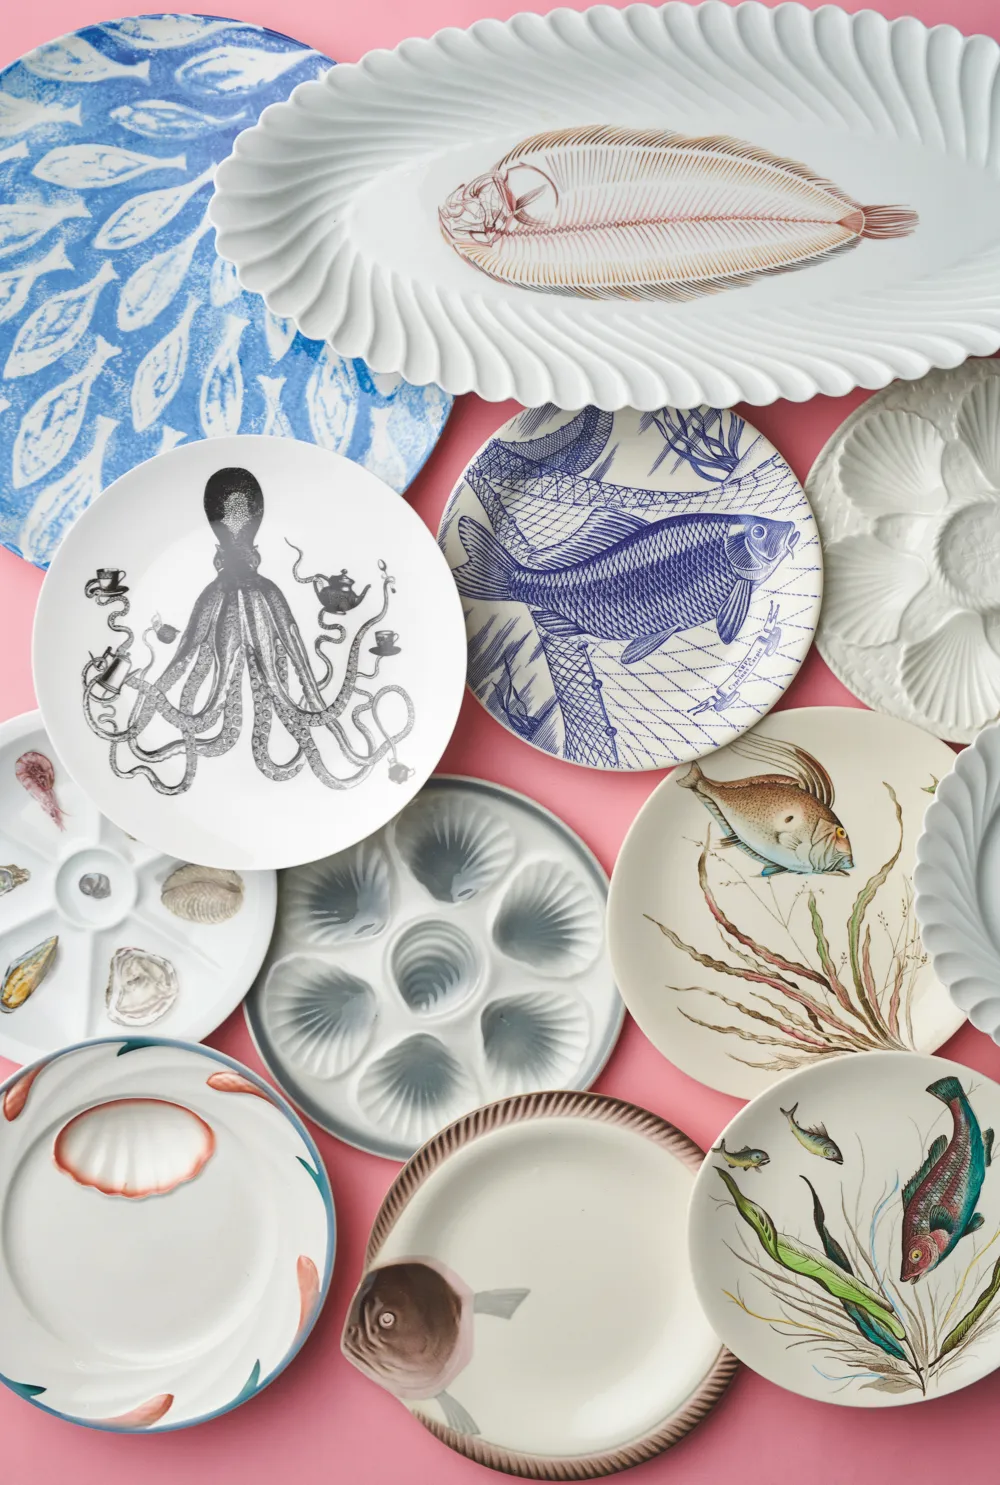 An array of sea-inspired plates